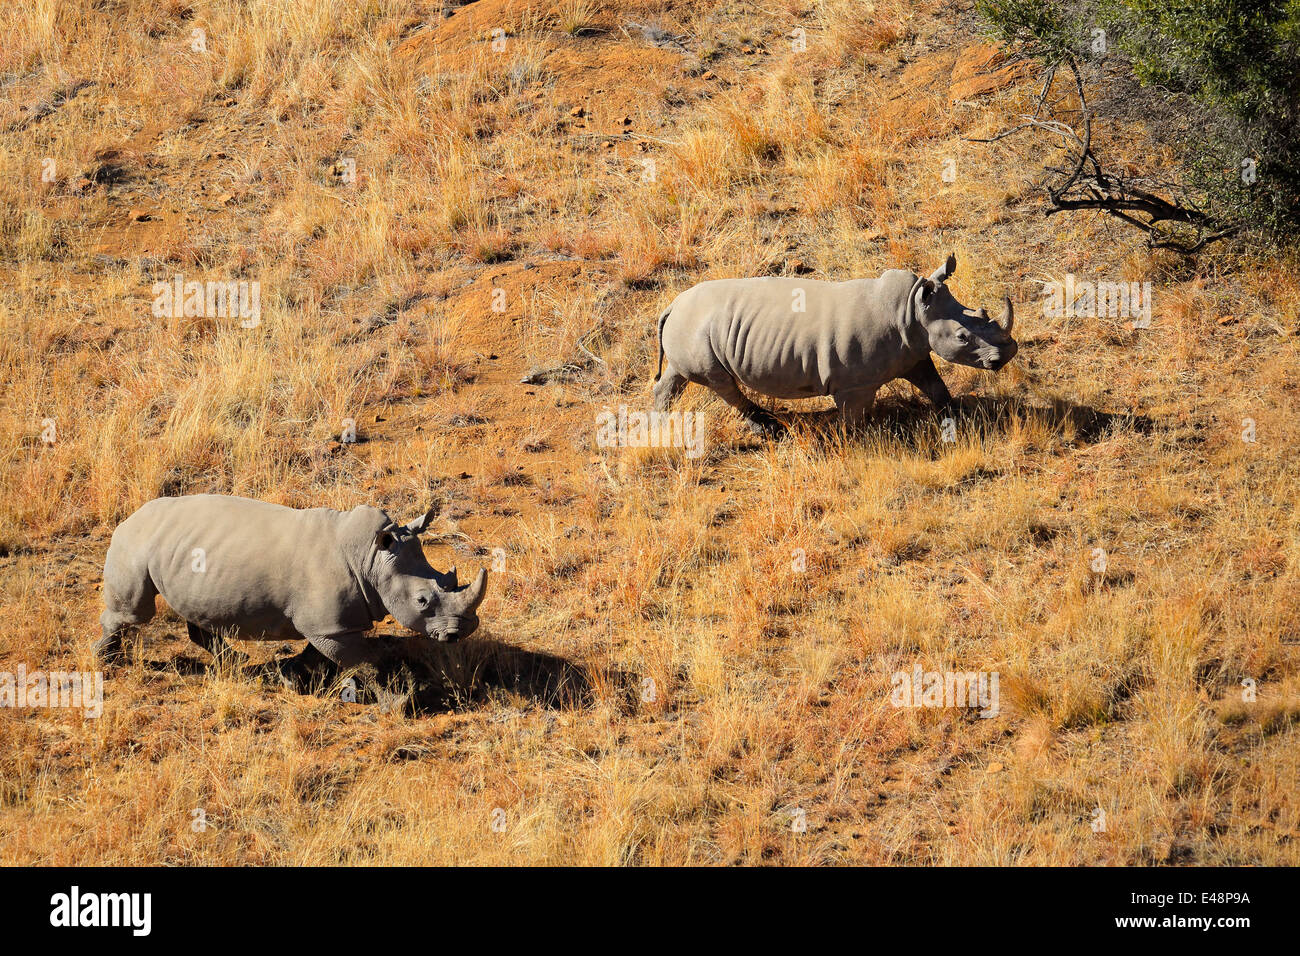 Aerial view of a pair of white rhinoceros (Ceratotherium simum) in grassland, South Africa Stock Photo